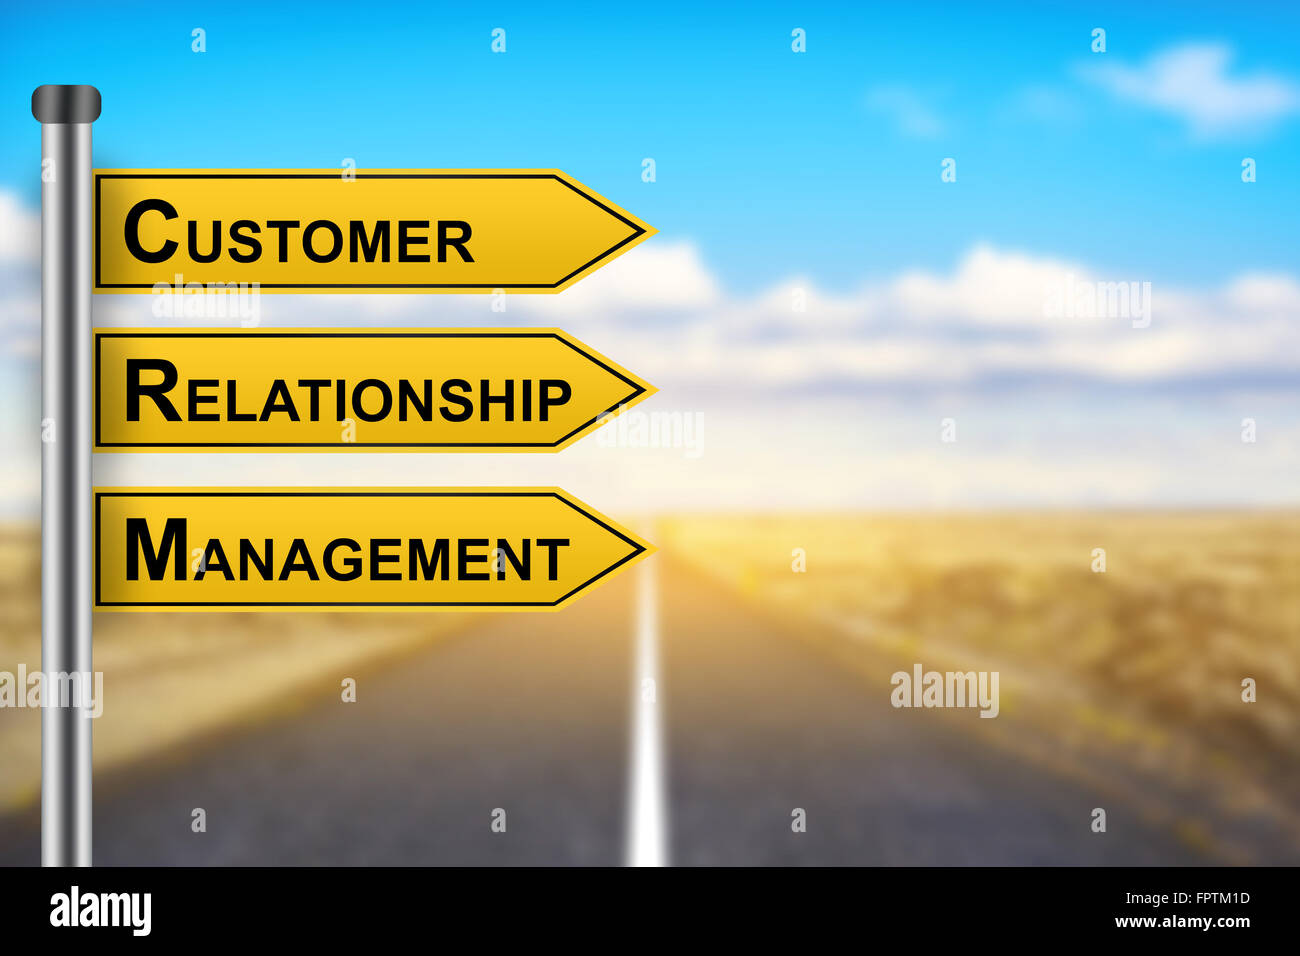 CRM or Customer relationship management words on yellow road sign with blurred background Stock Photo